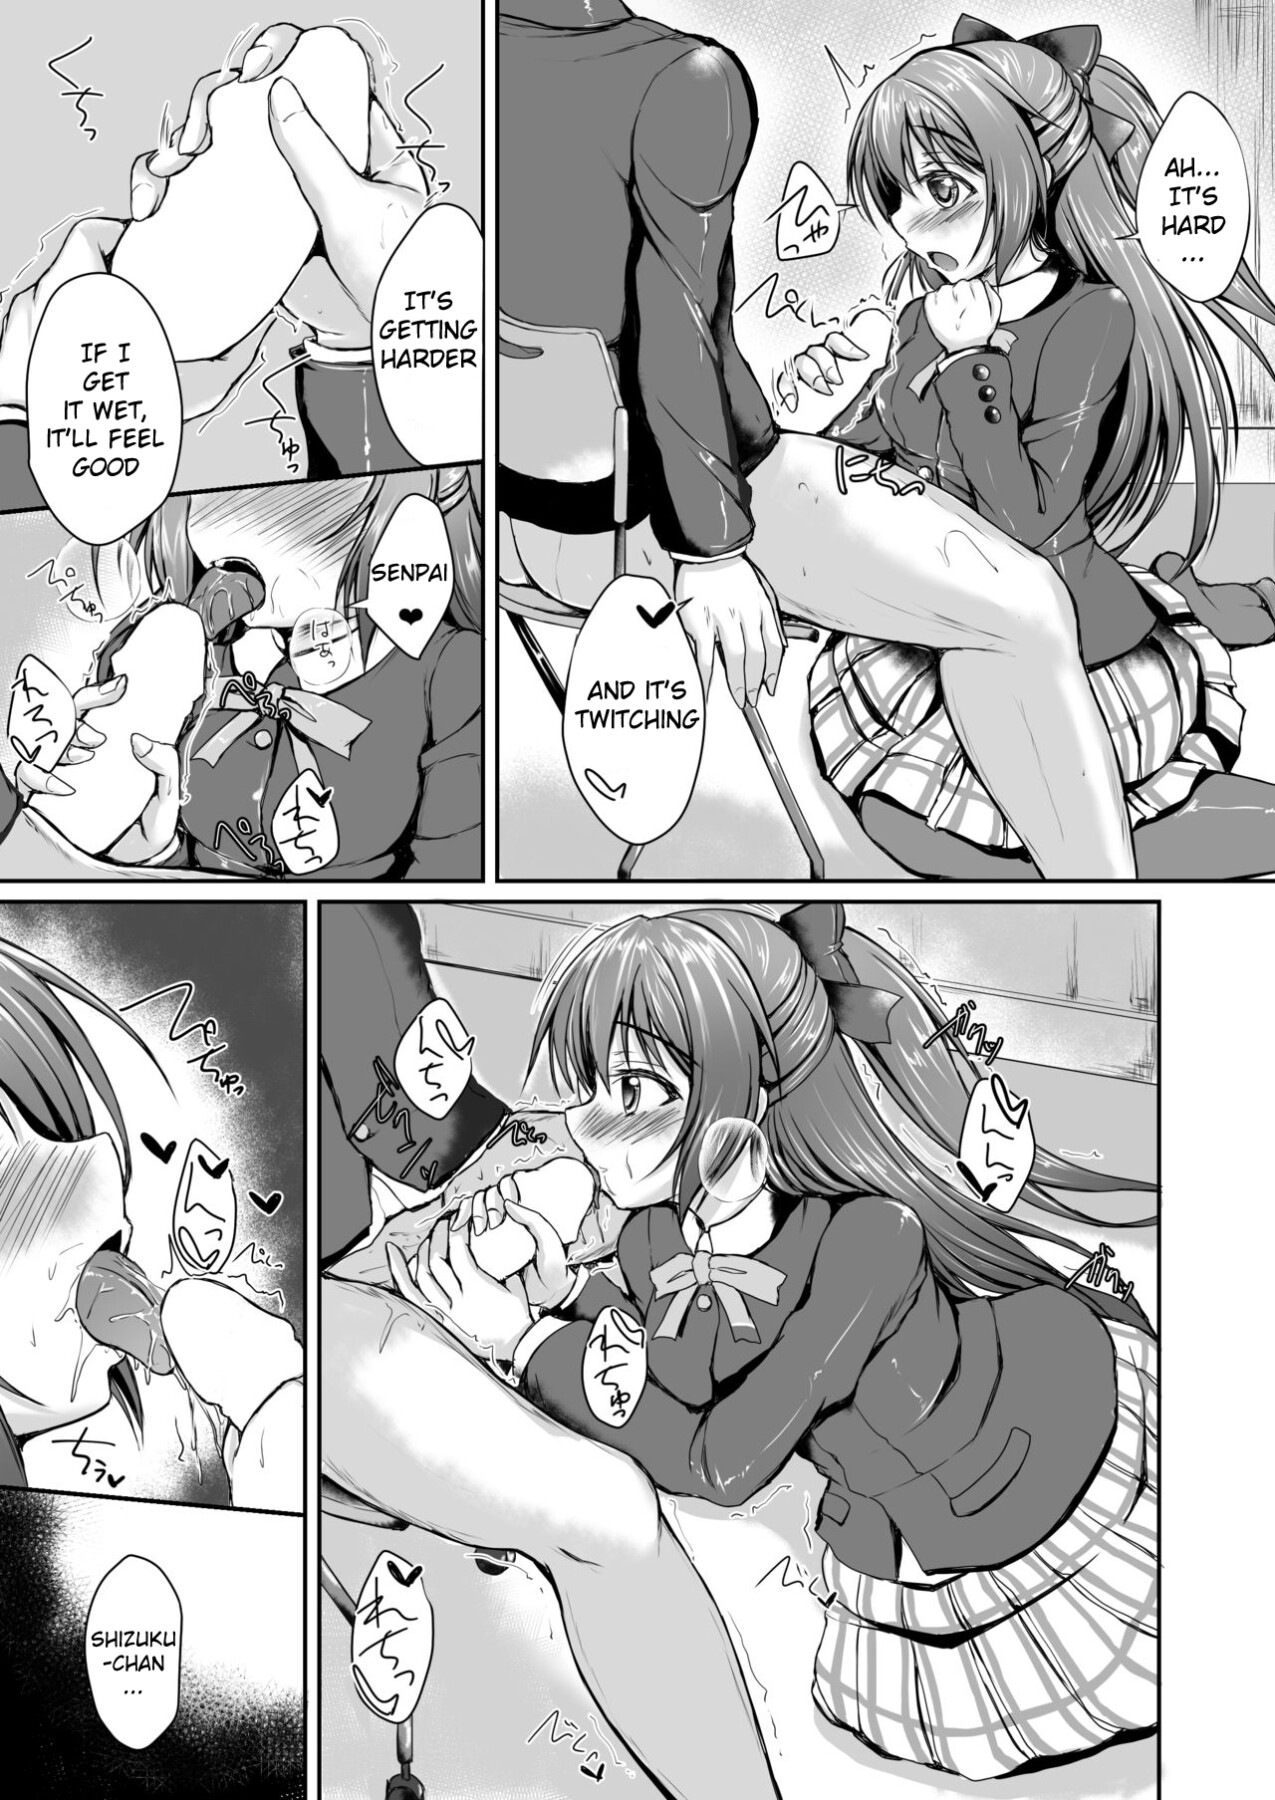 hentai manga Would you like to try it for the first time with Shizuku?